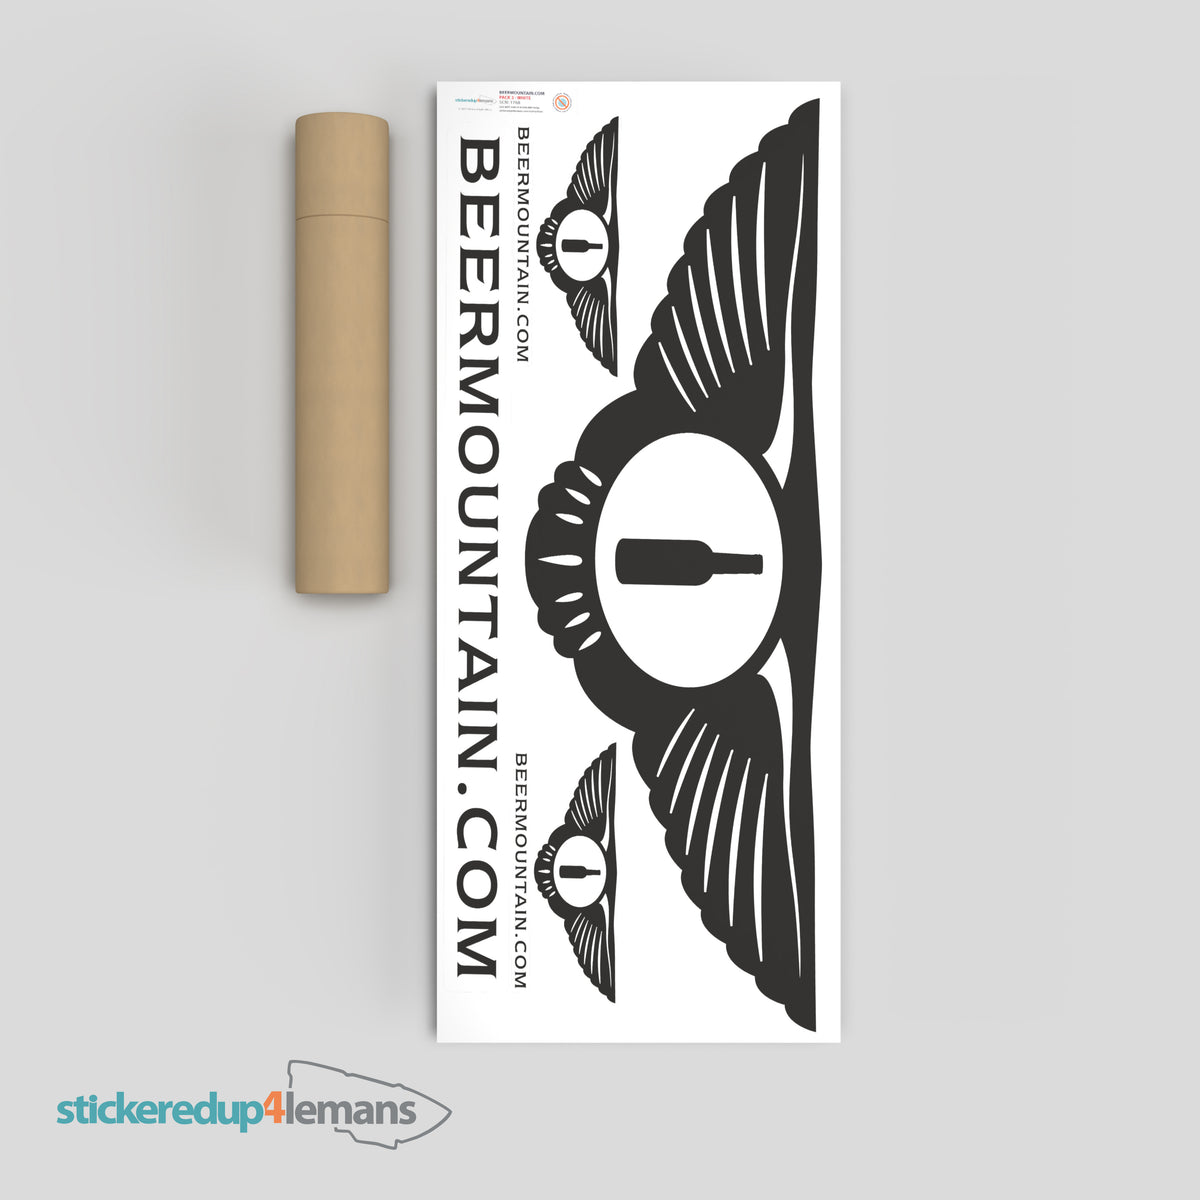 Beermountain Sticker Pack 3 (Extra Large Logo)